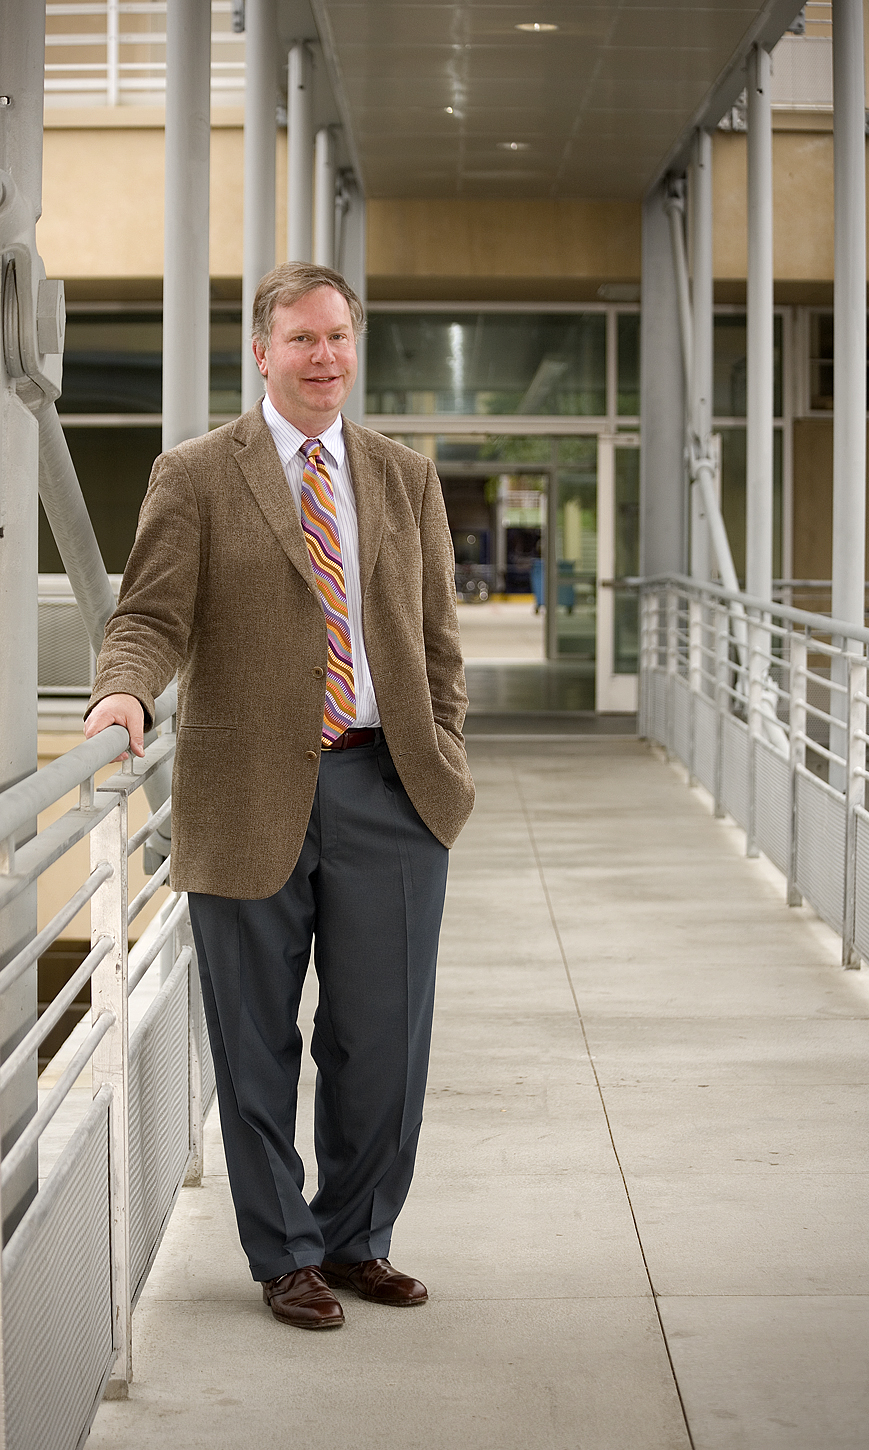 Henri deHahn stands on a covered walkway.